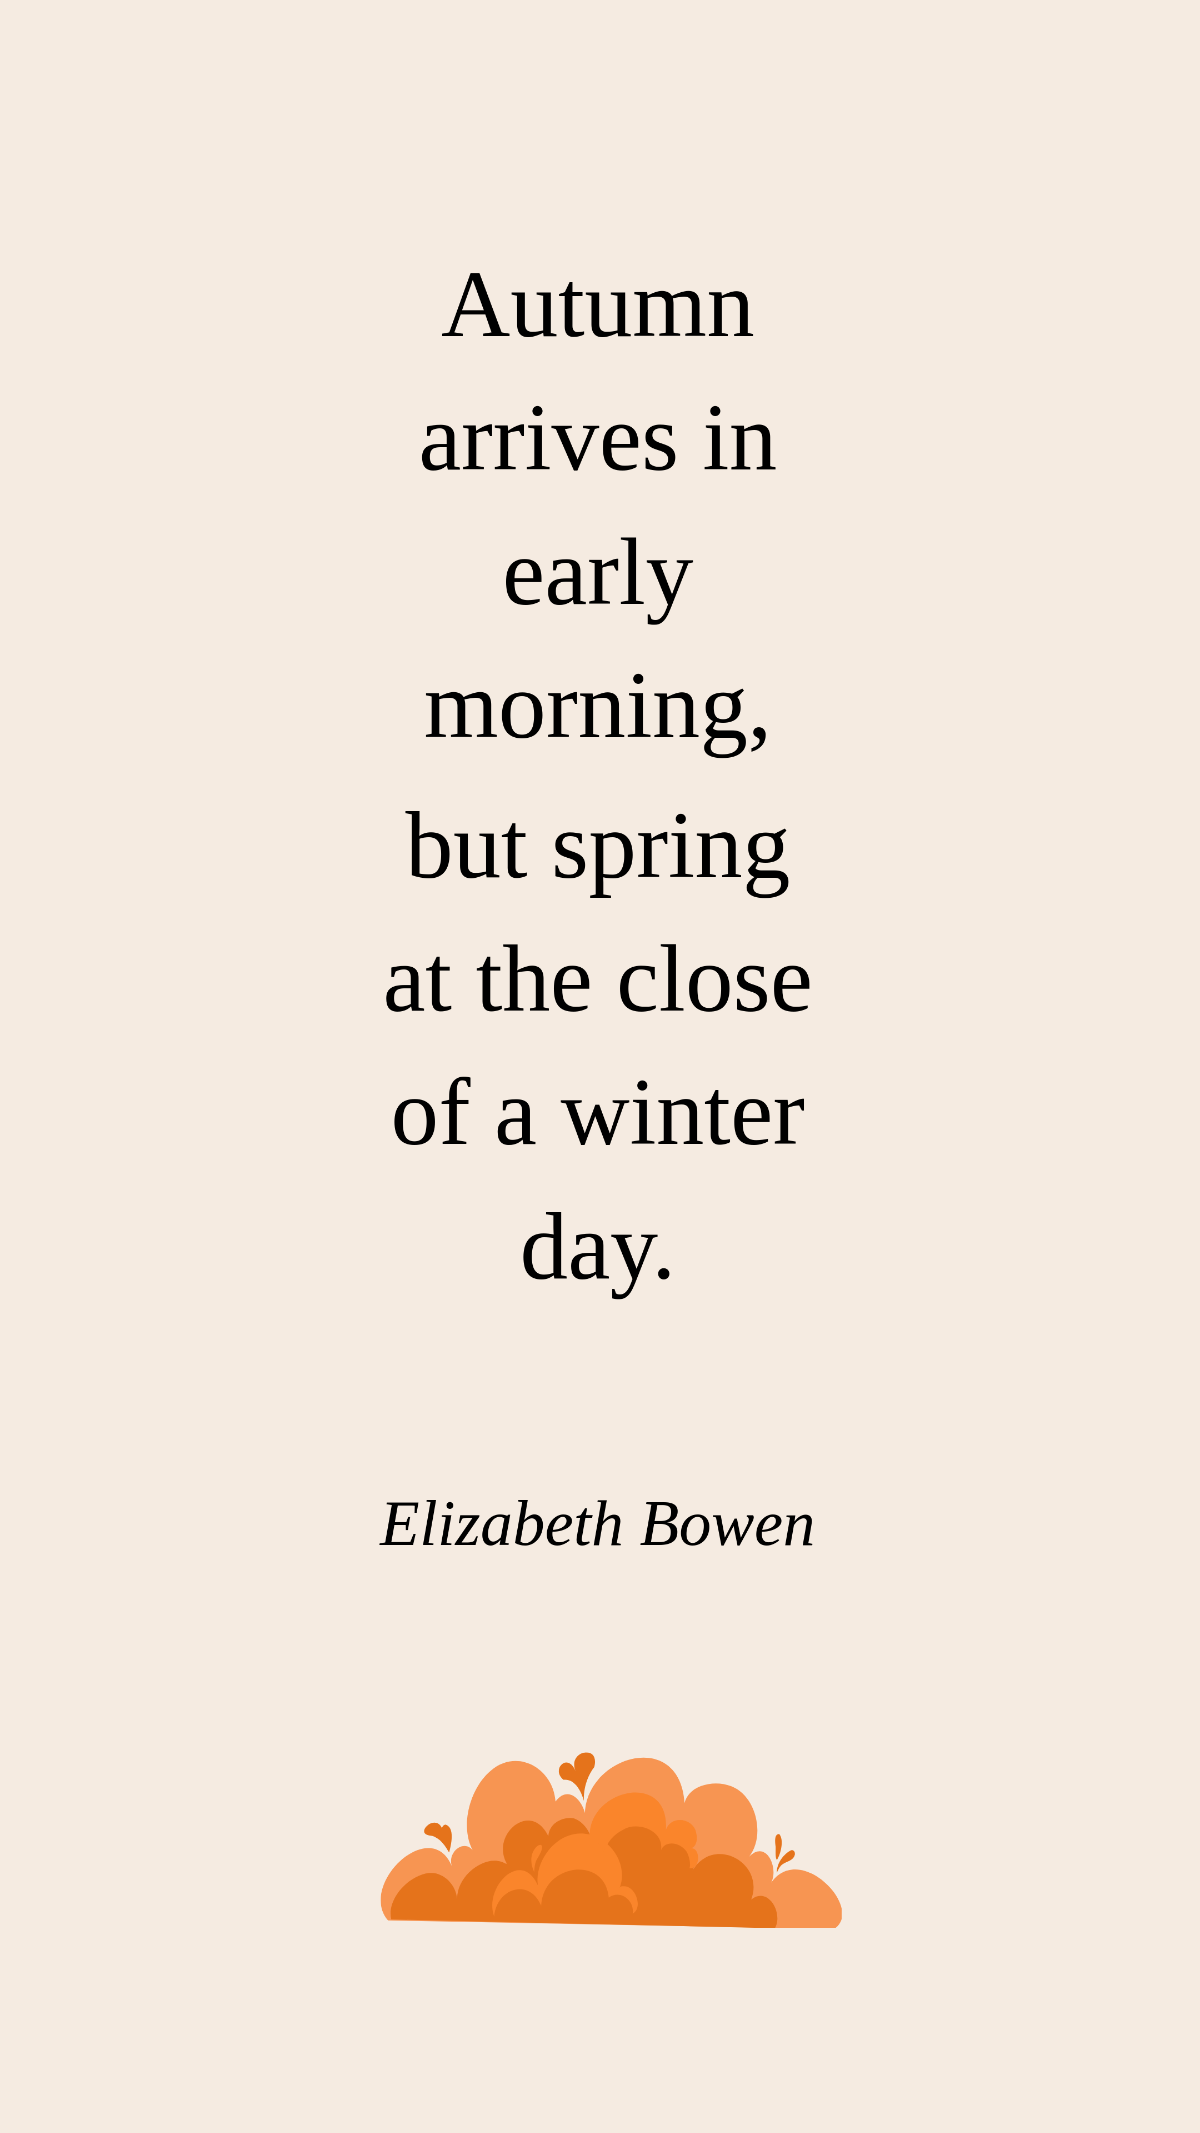 Elizabeth Bowen - Autumn arrives in early morning, but spring at the close of a winter day.